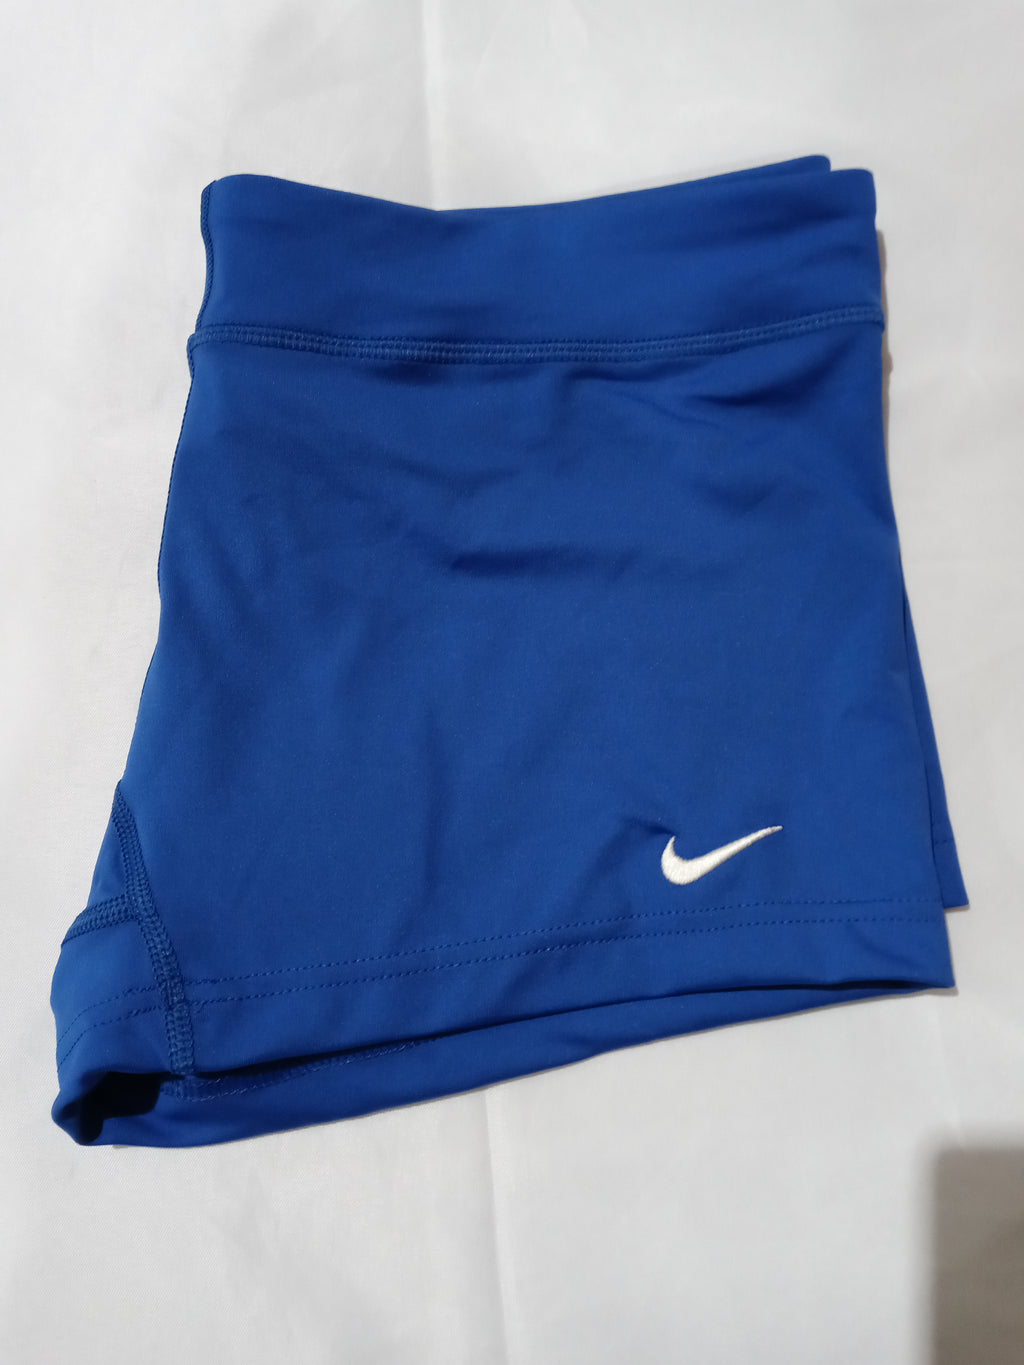 Nike Performance Women's Volleyball Game Shorts (Large, Royal)